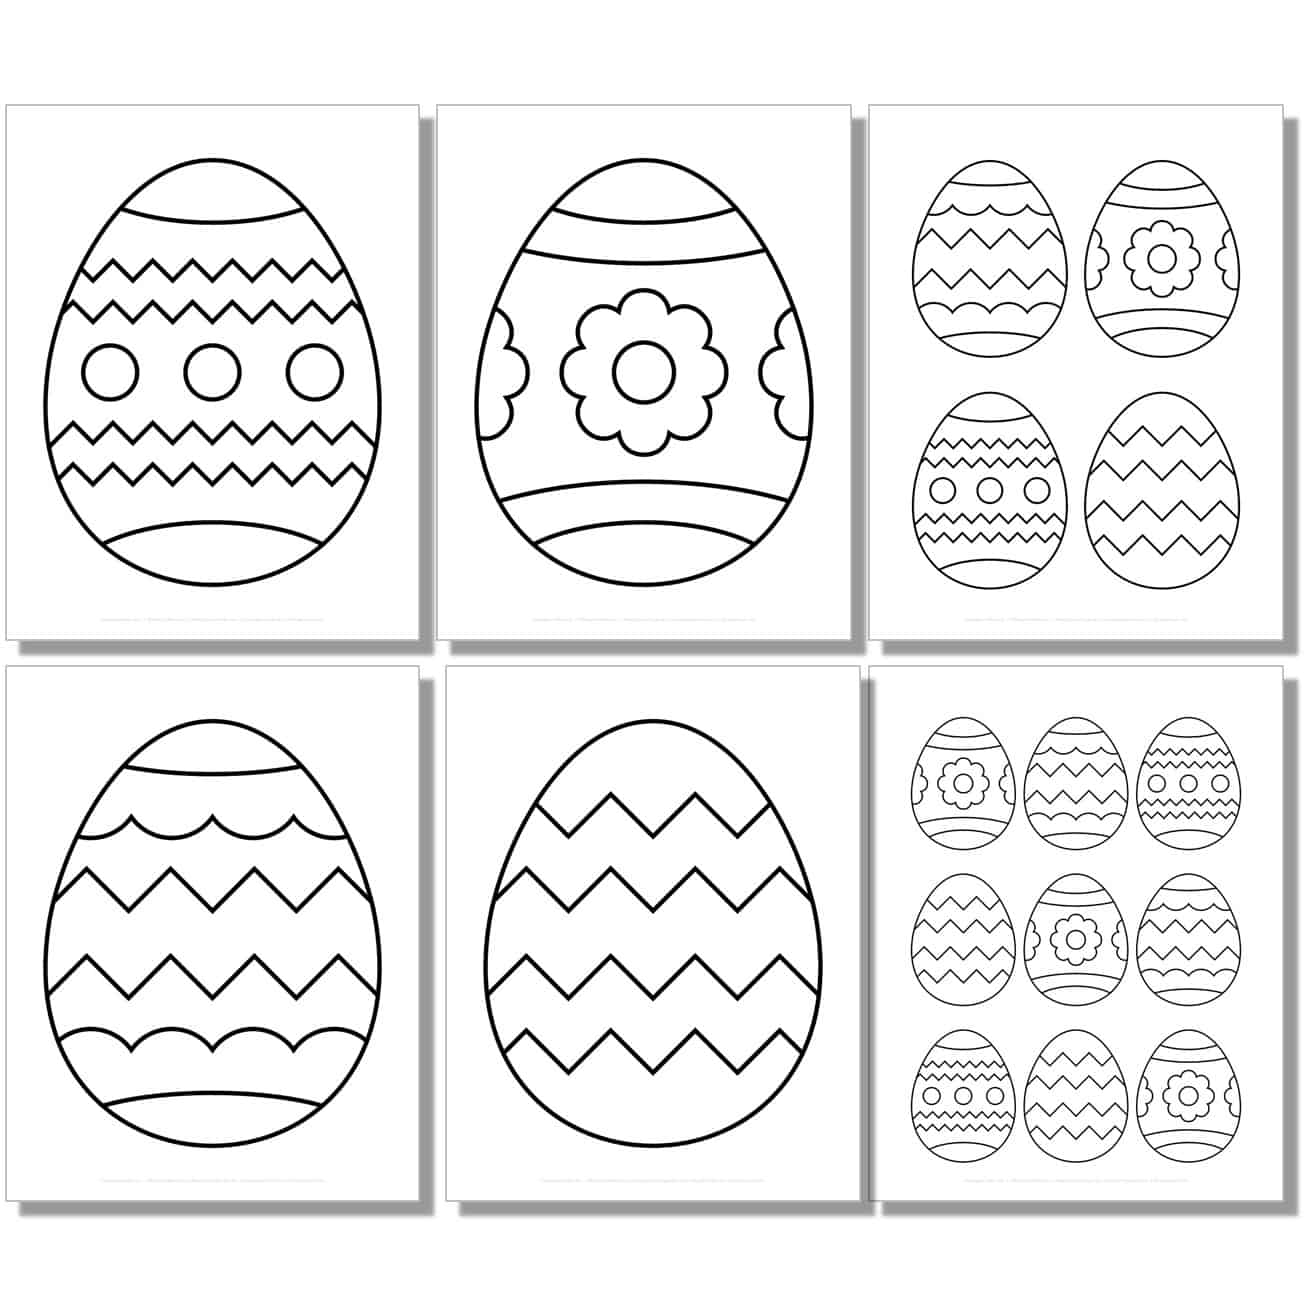 large, medium, small easy patterned easter egg templates, outlines, stencils.